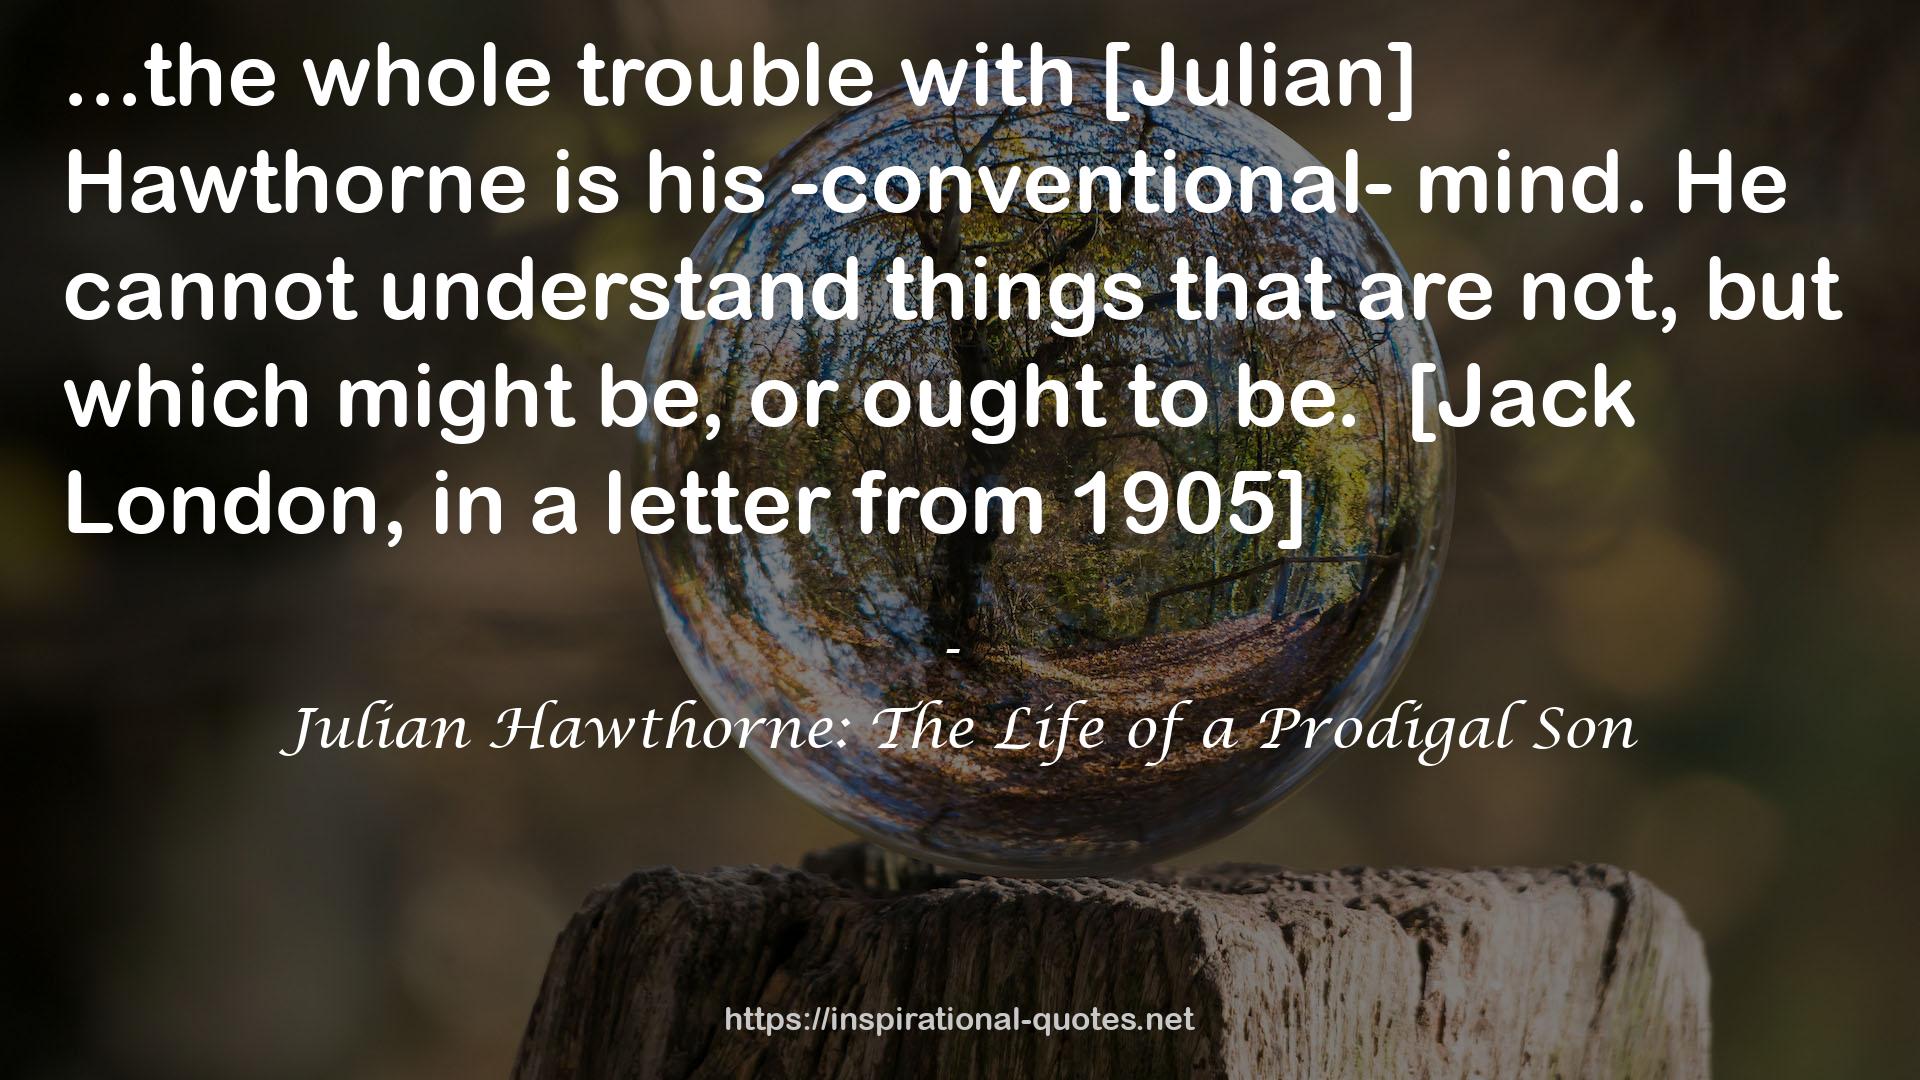 Julian Hawthorne: The Life of a Prodigal Son QUOTES